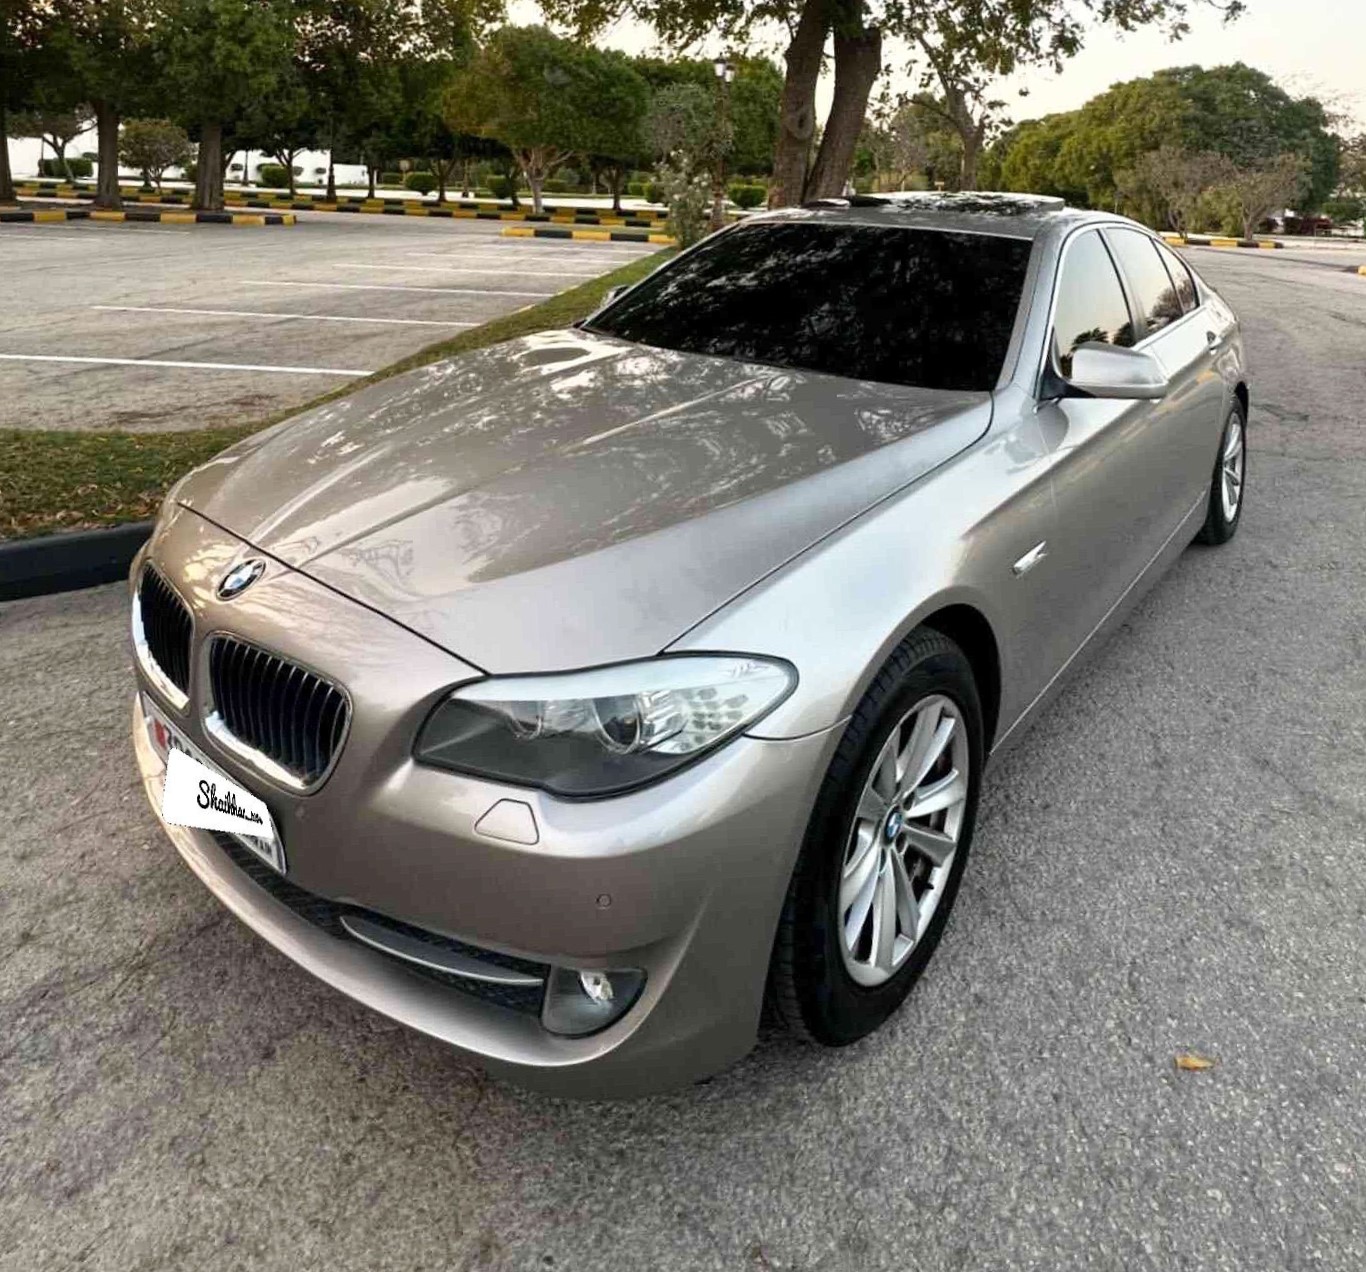 BMW The 5